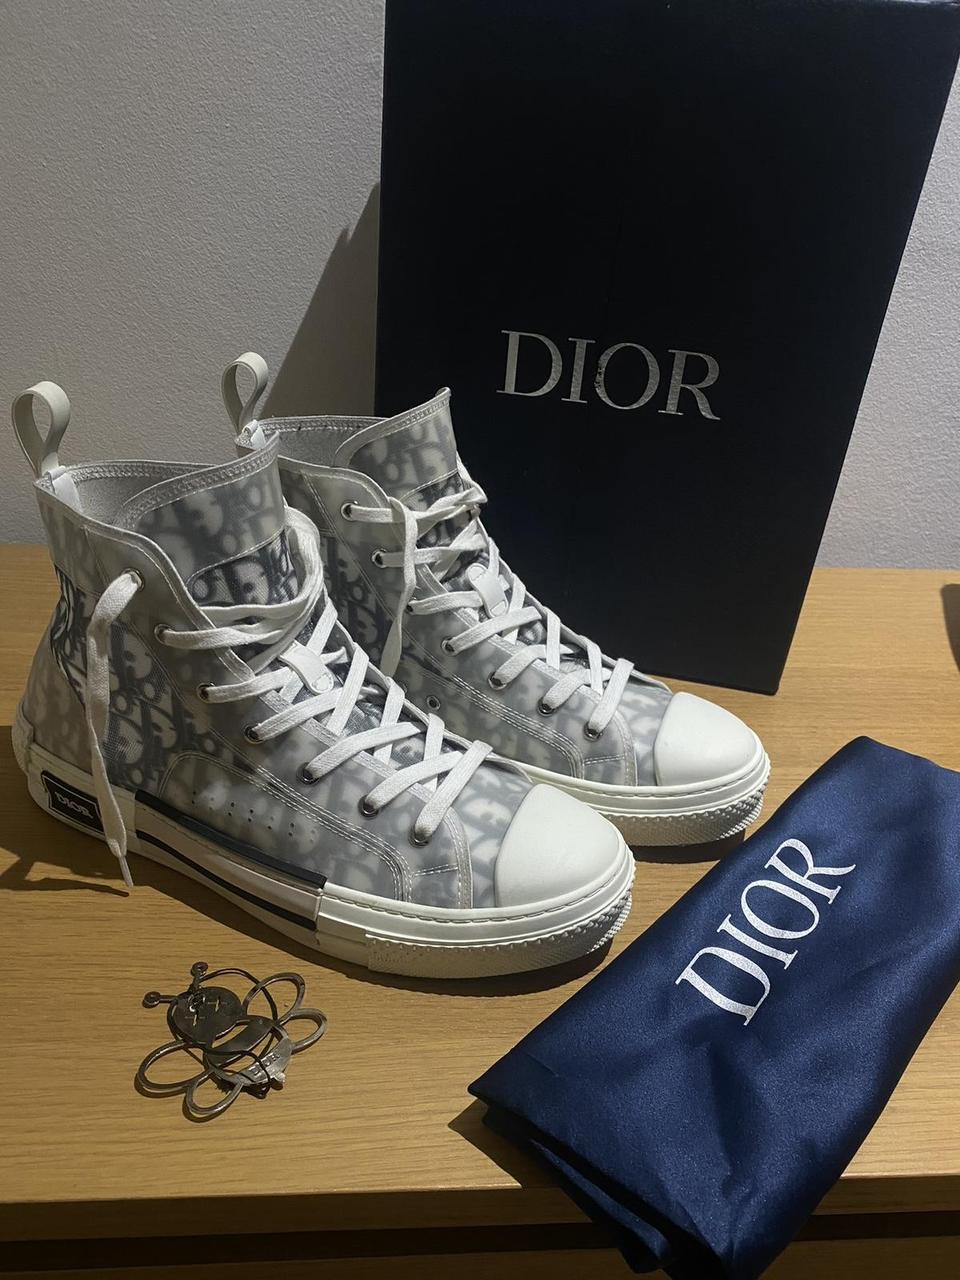 Dior B23s Black and White Trainers Uk 11 In... - Depop